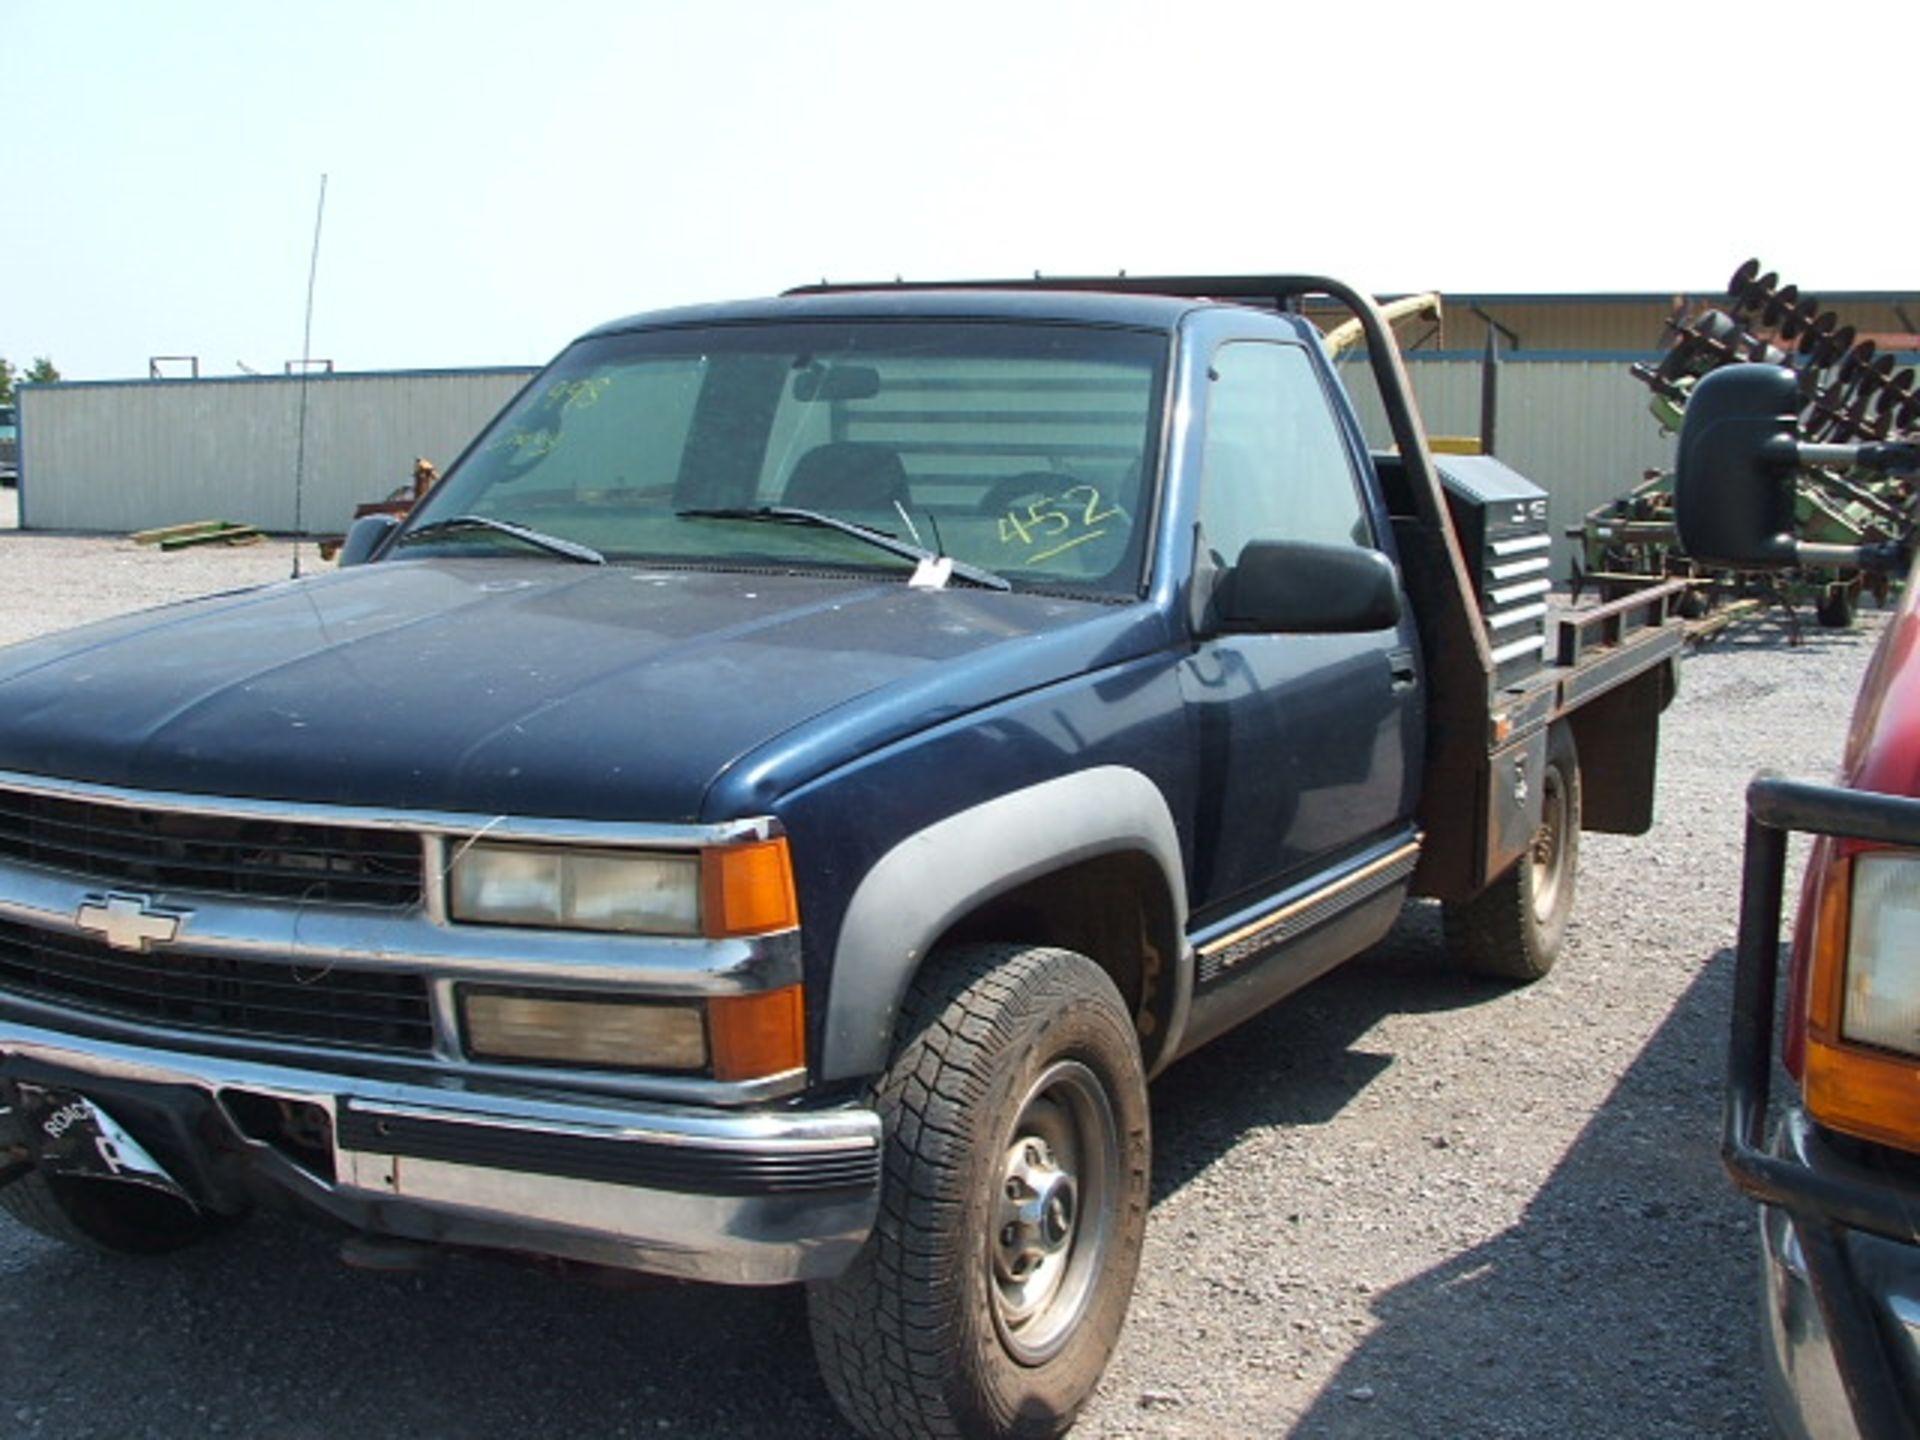 Lot 452 1998 Chevy 3500, 5 Speed, 4WD, W/Butler Bale Bed - Image 3 of 6